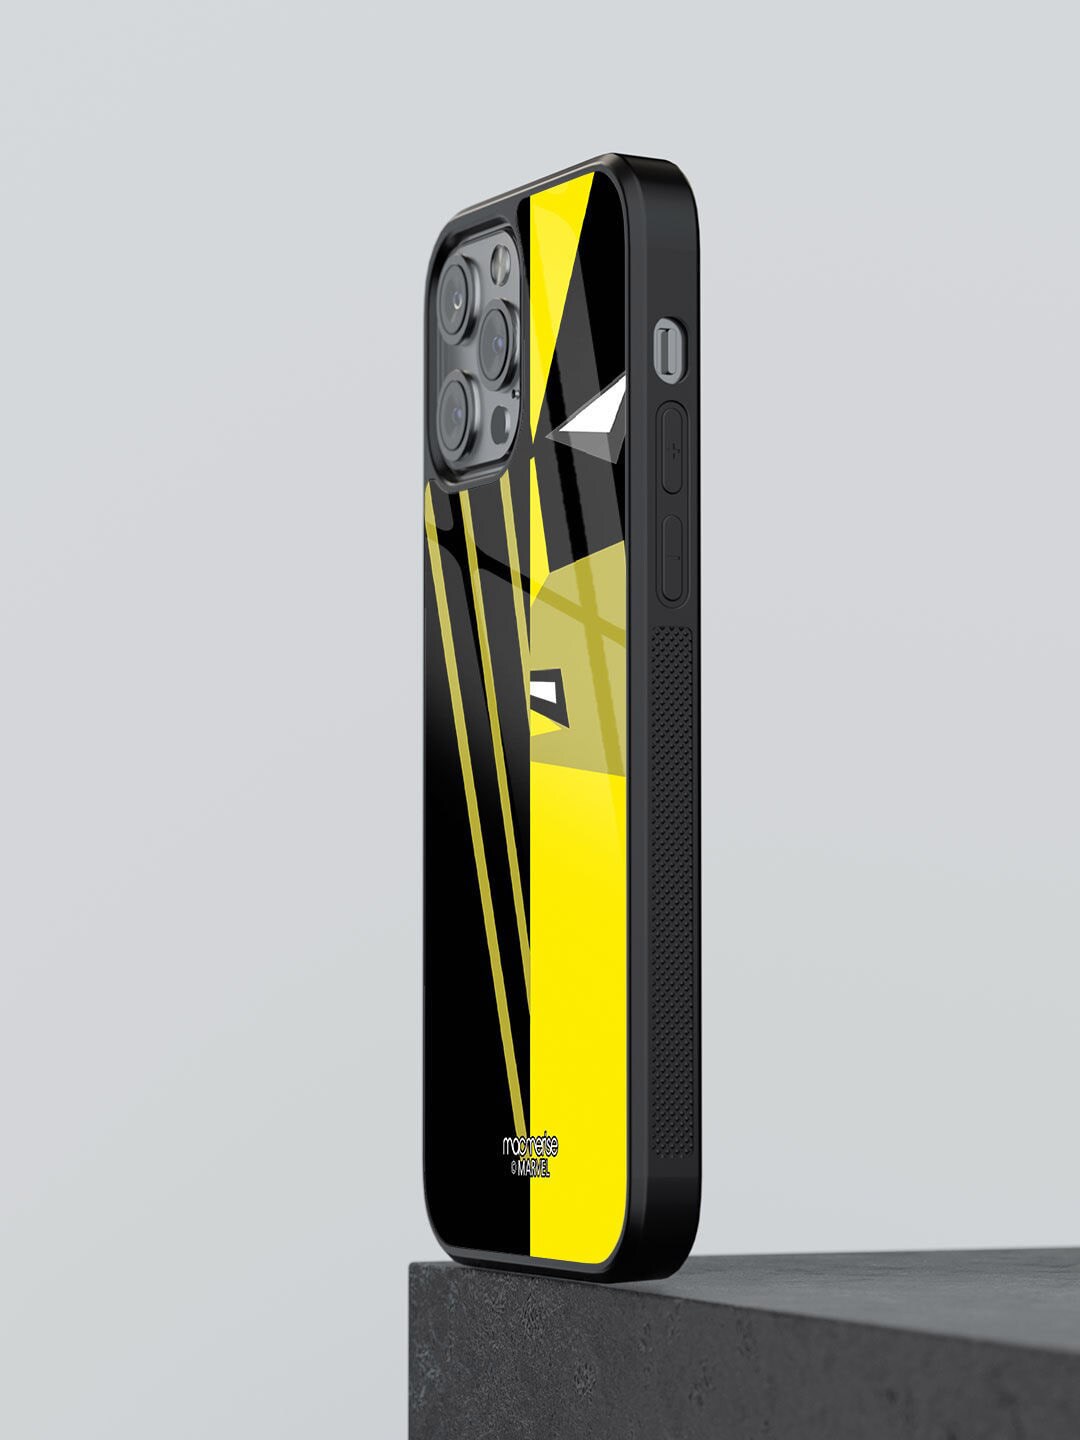 macmerise Yellow Printed Glass iPhone 12 Pro Back Case Price in India